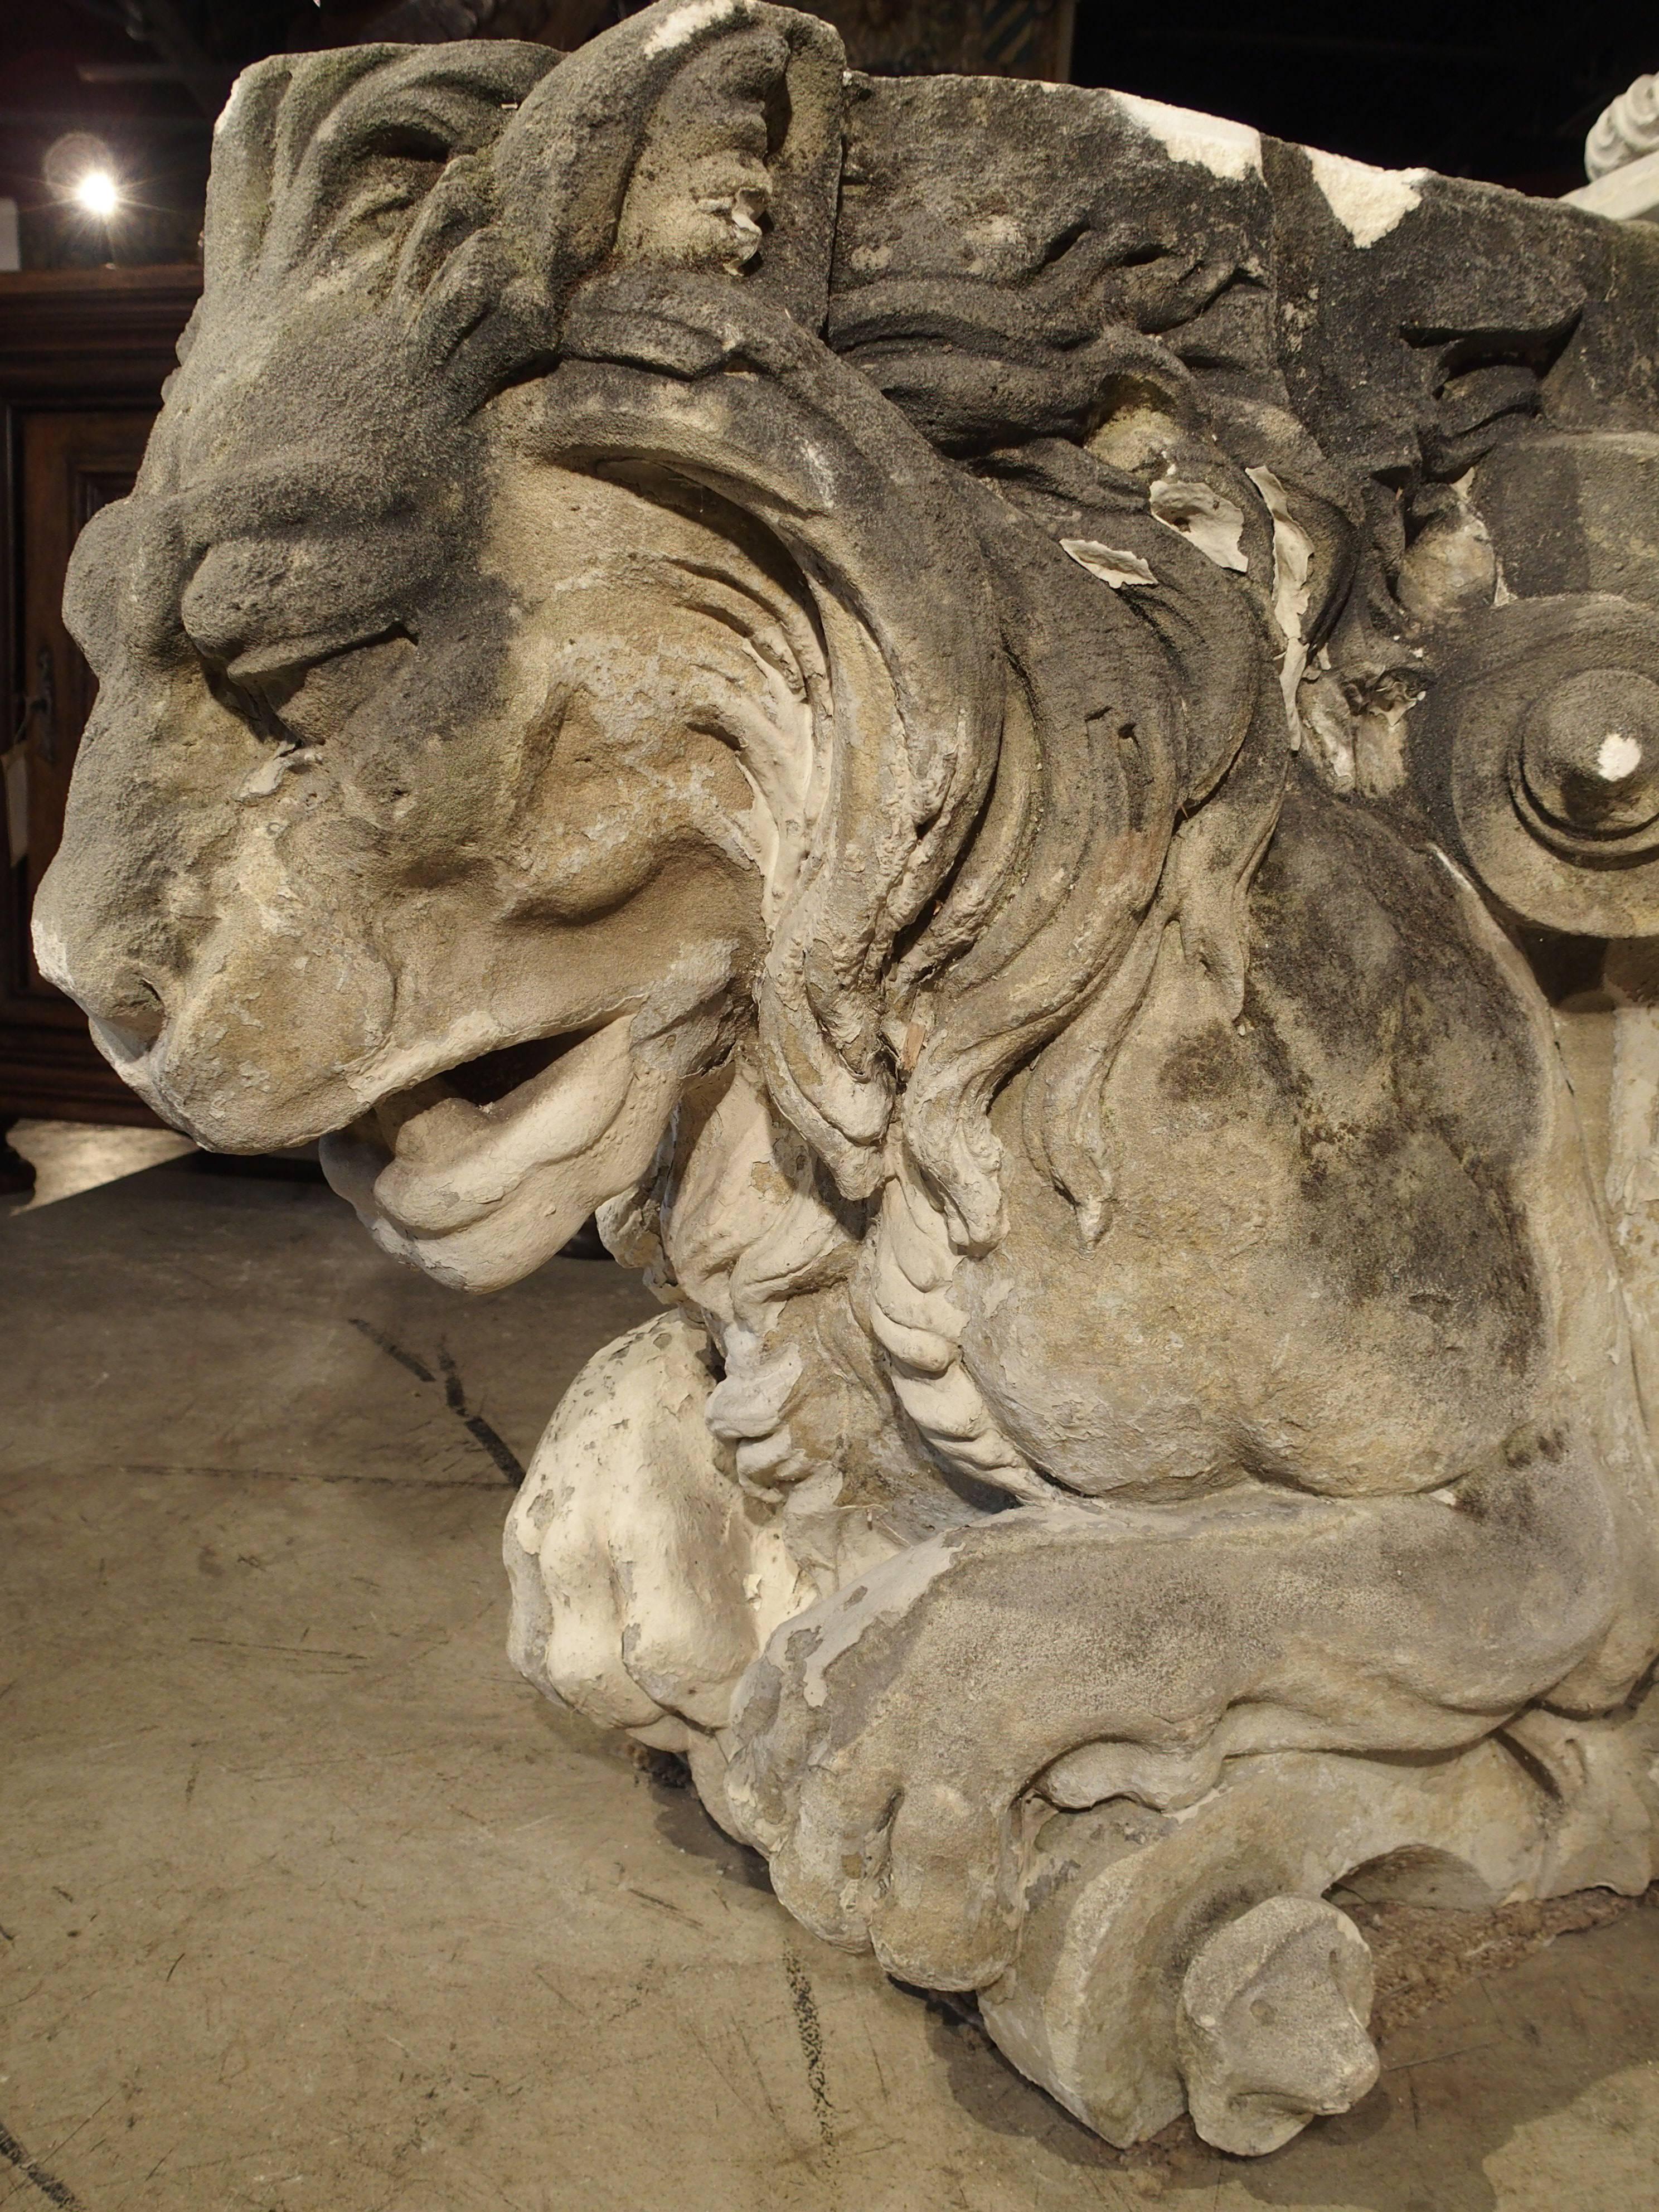 These large and phenomenal antique French stone lions were removed from the front of a building at some point in their history. They were likely attached to the front of a Chateau where they stood guard, representing strength, nobility, and bravery.